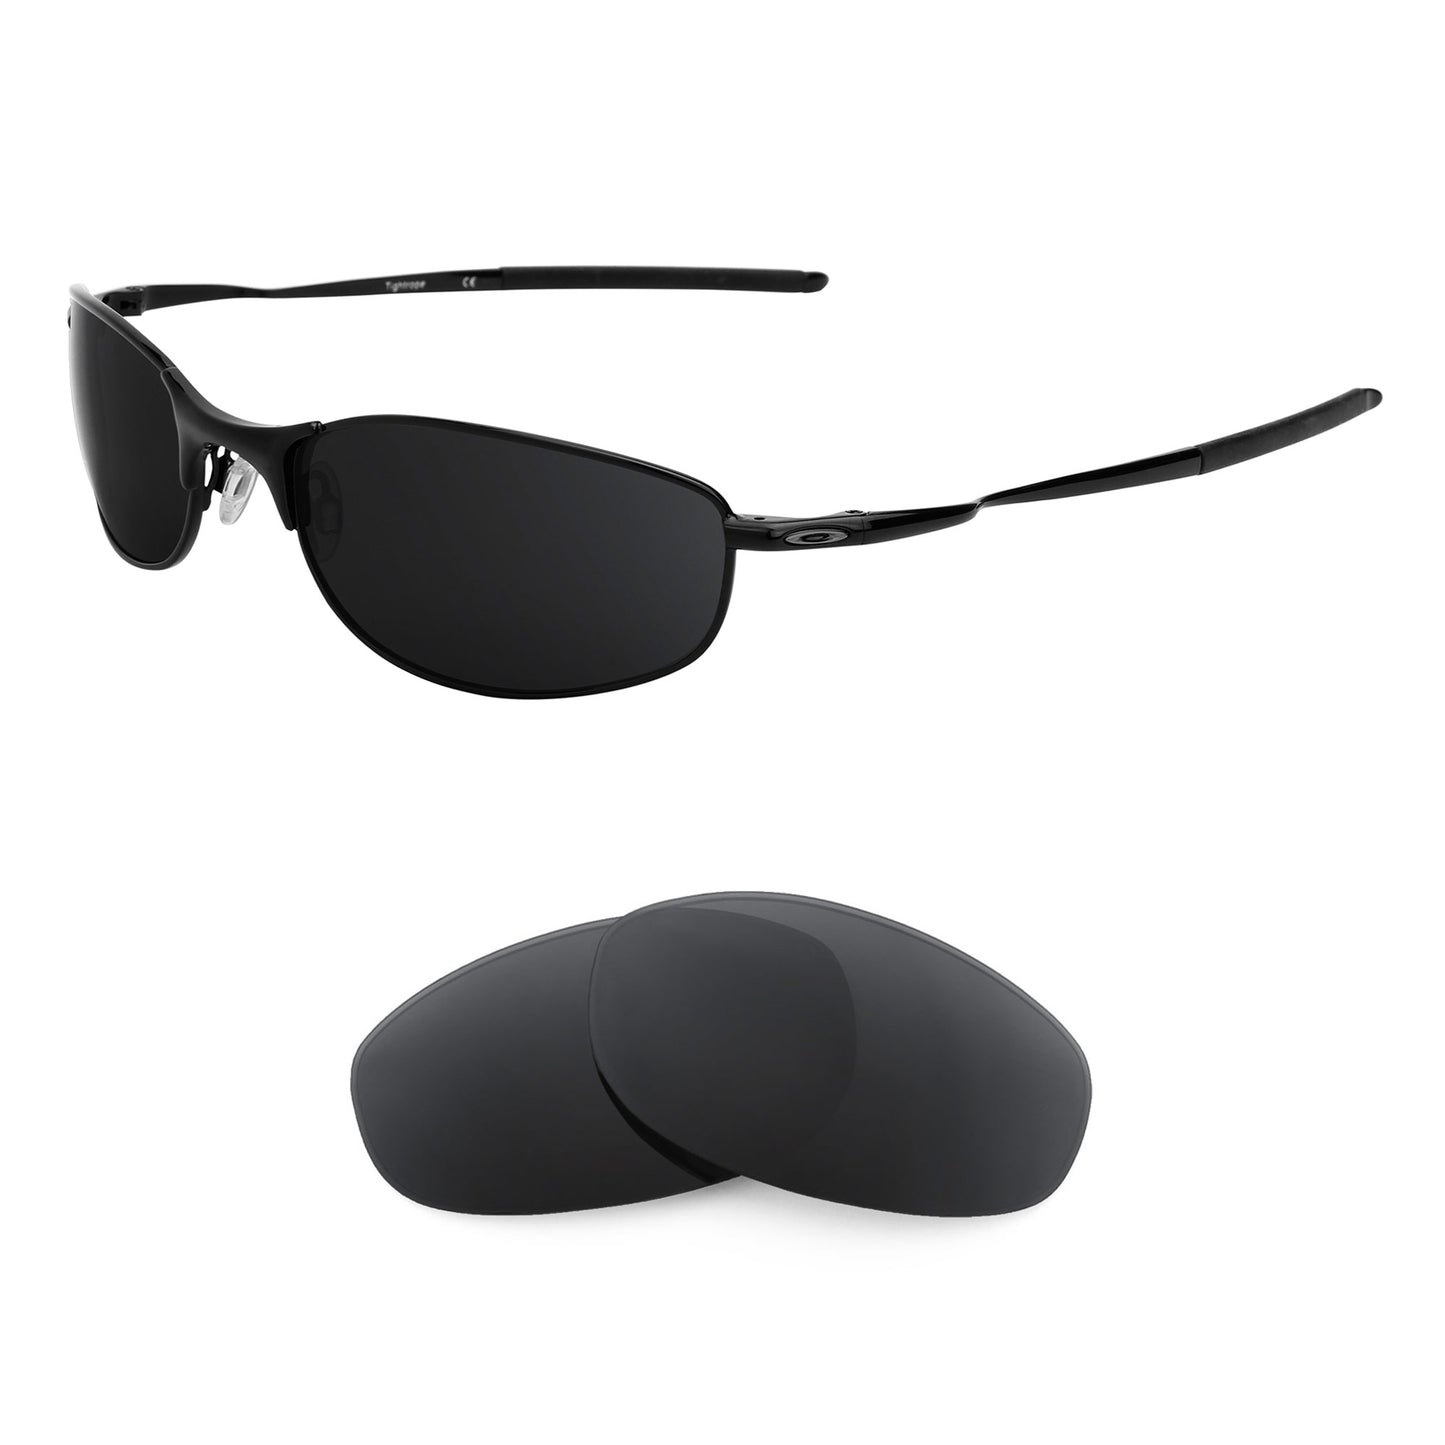 Oakley Tightrope sunglasses with replacement lenses